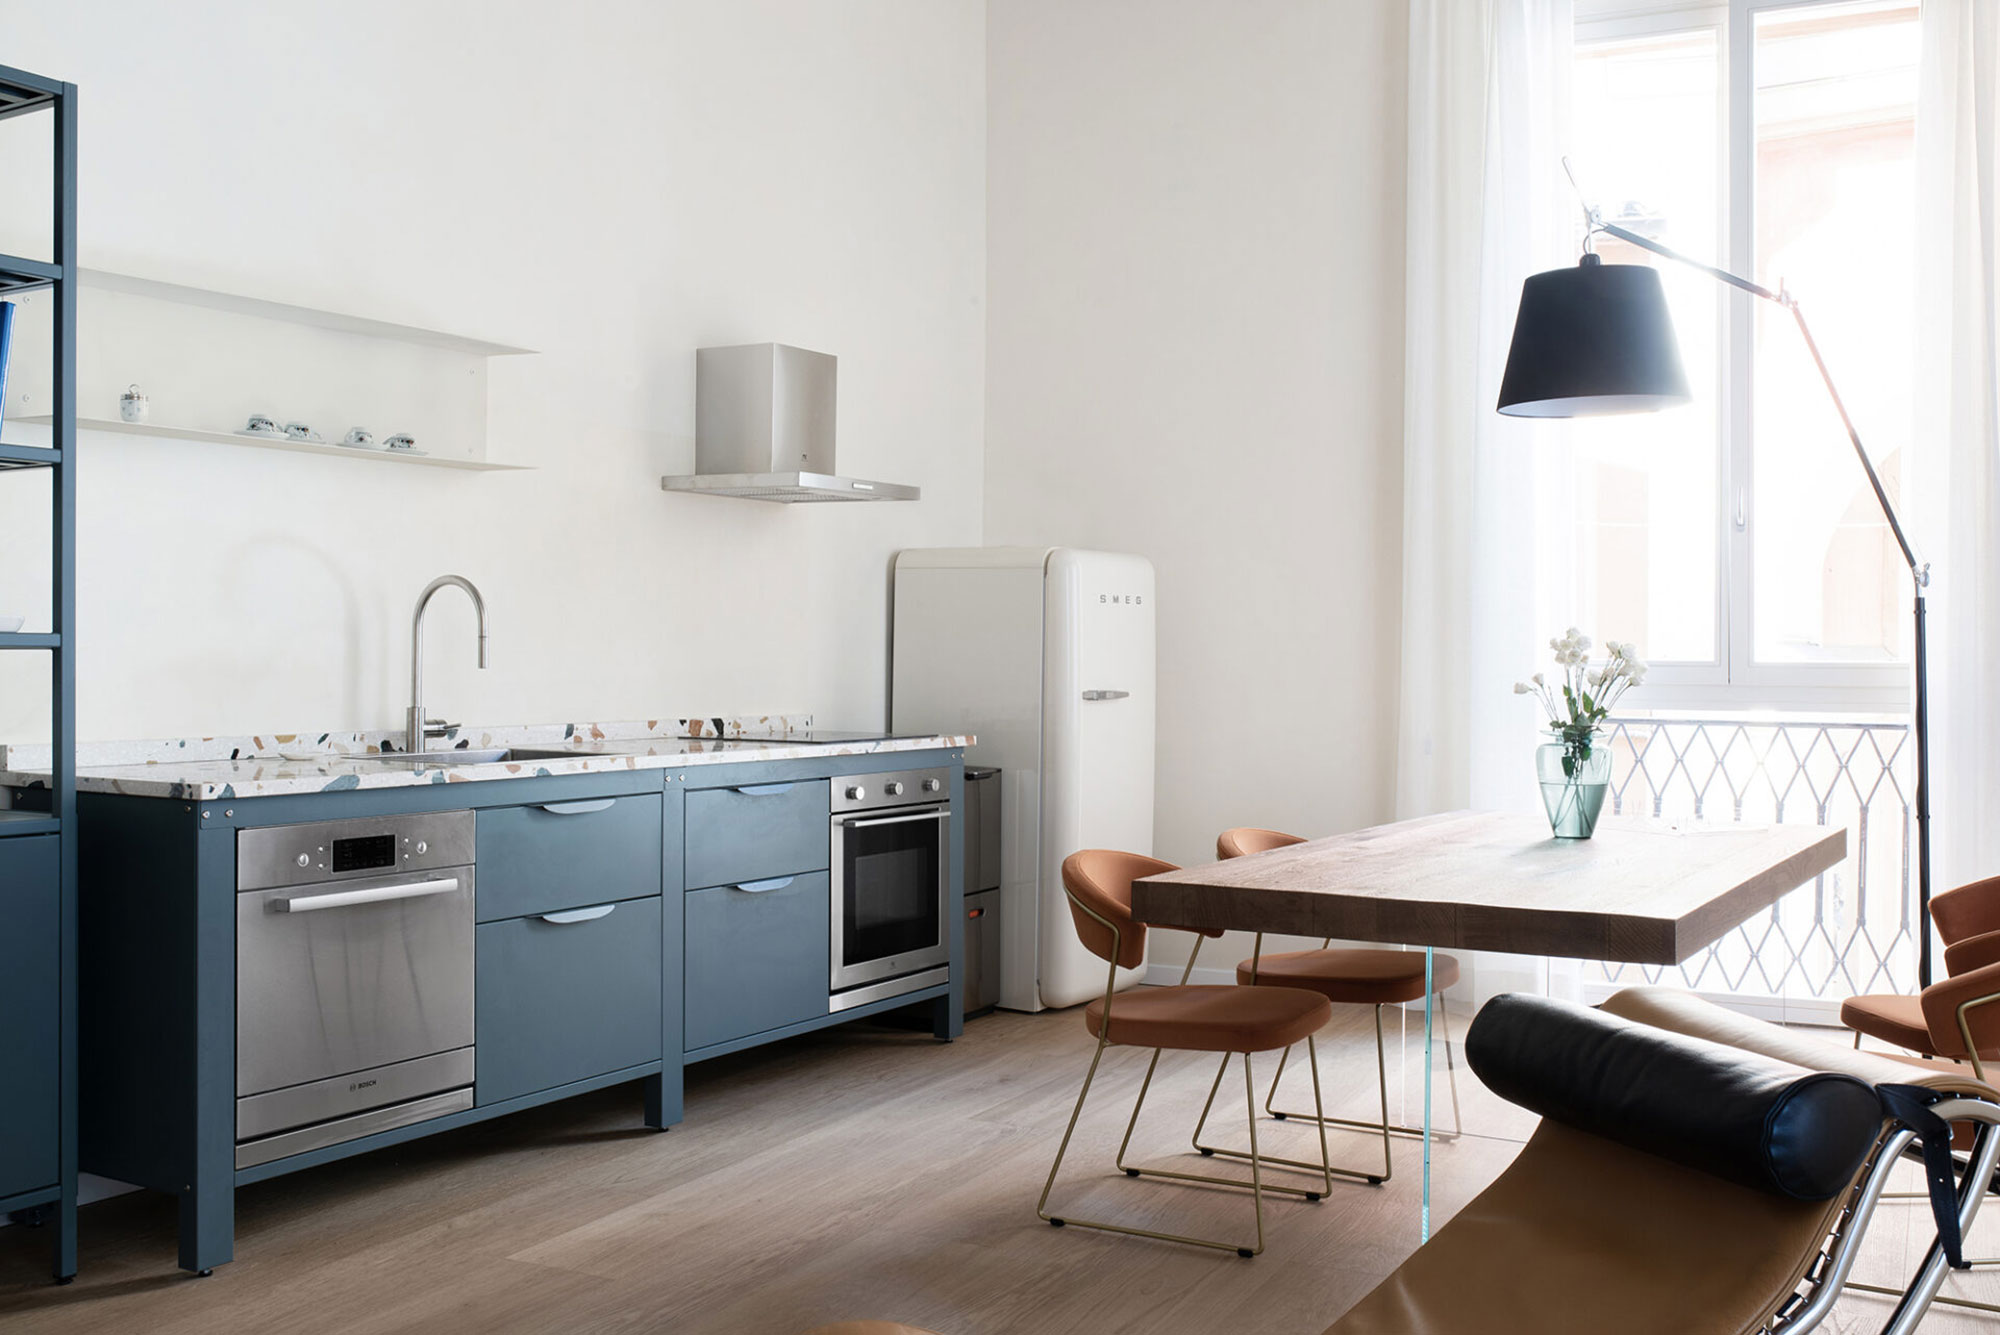 Introducing the Very Simple Kitchen - Gessato